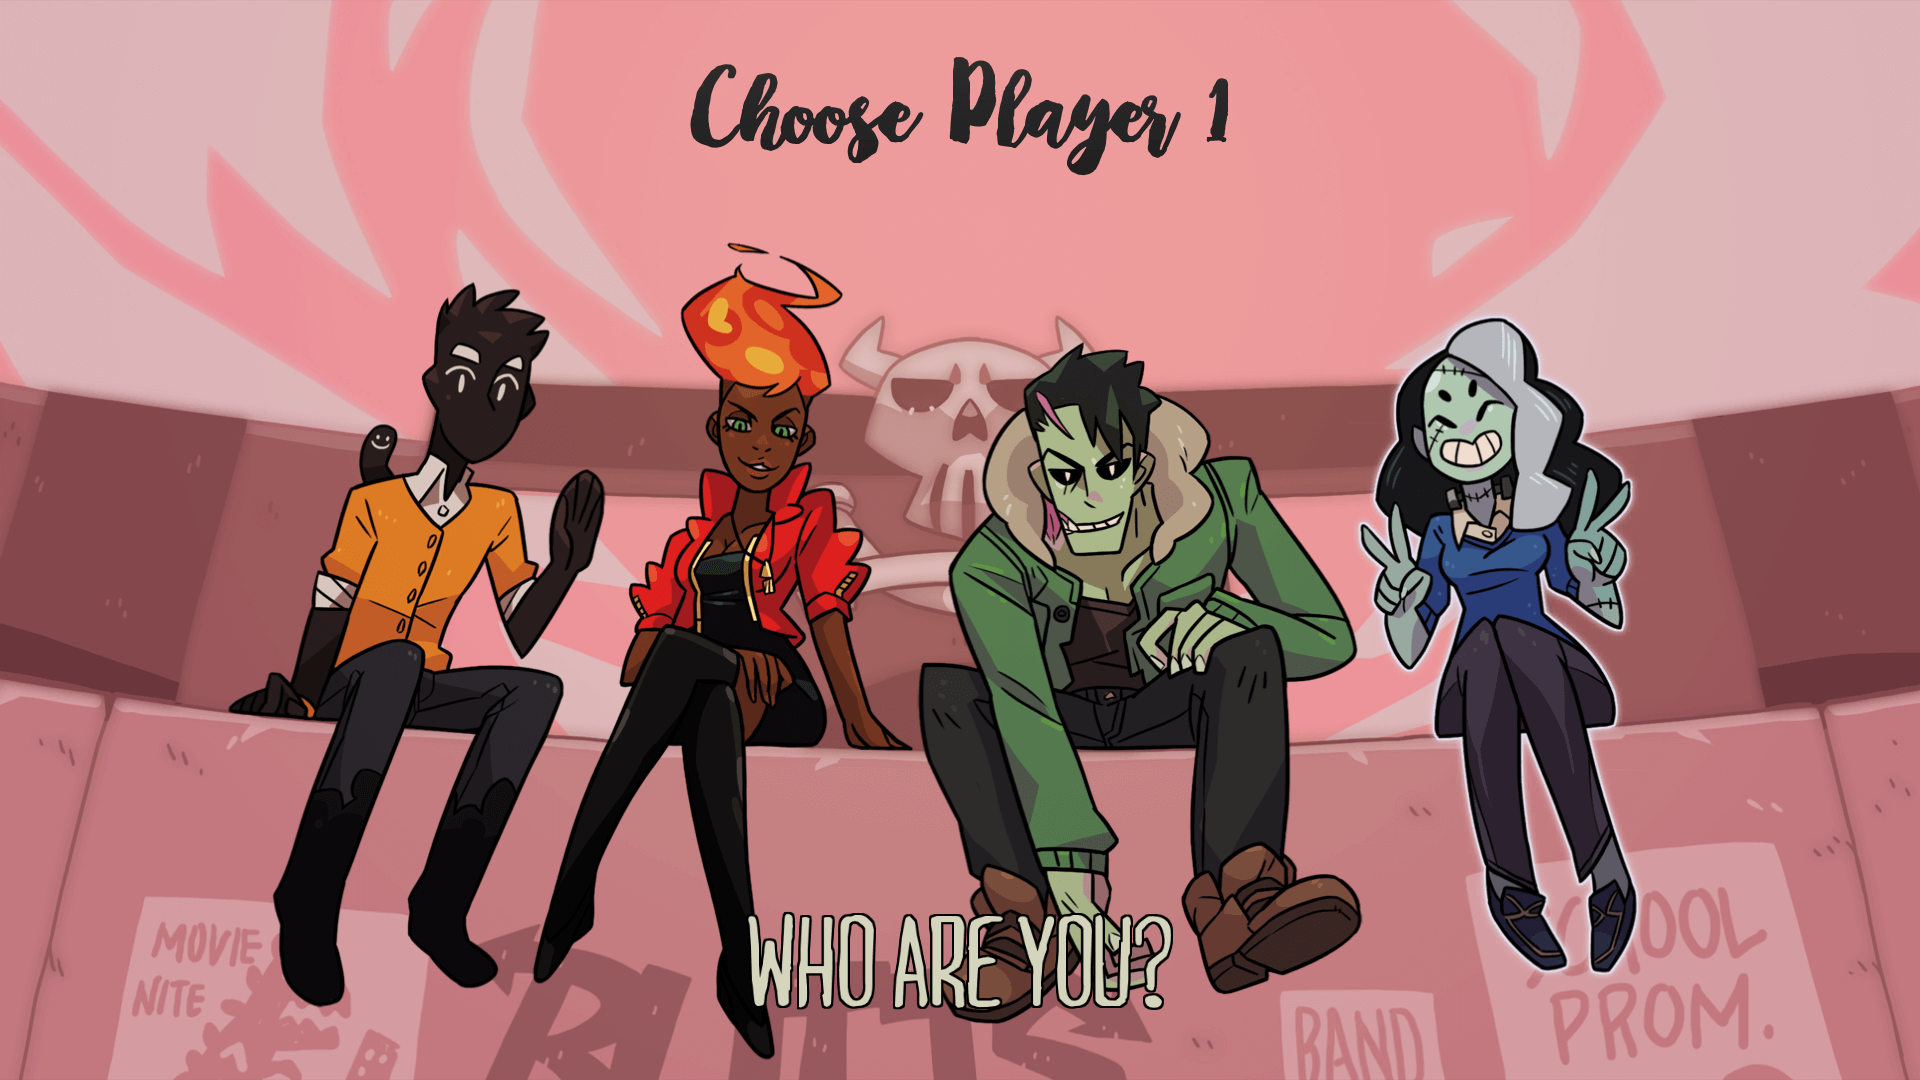 Monster Prom - Choosing a character